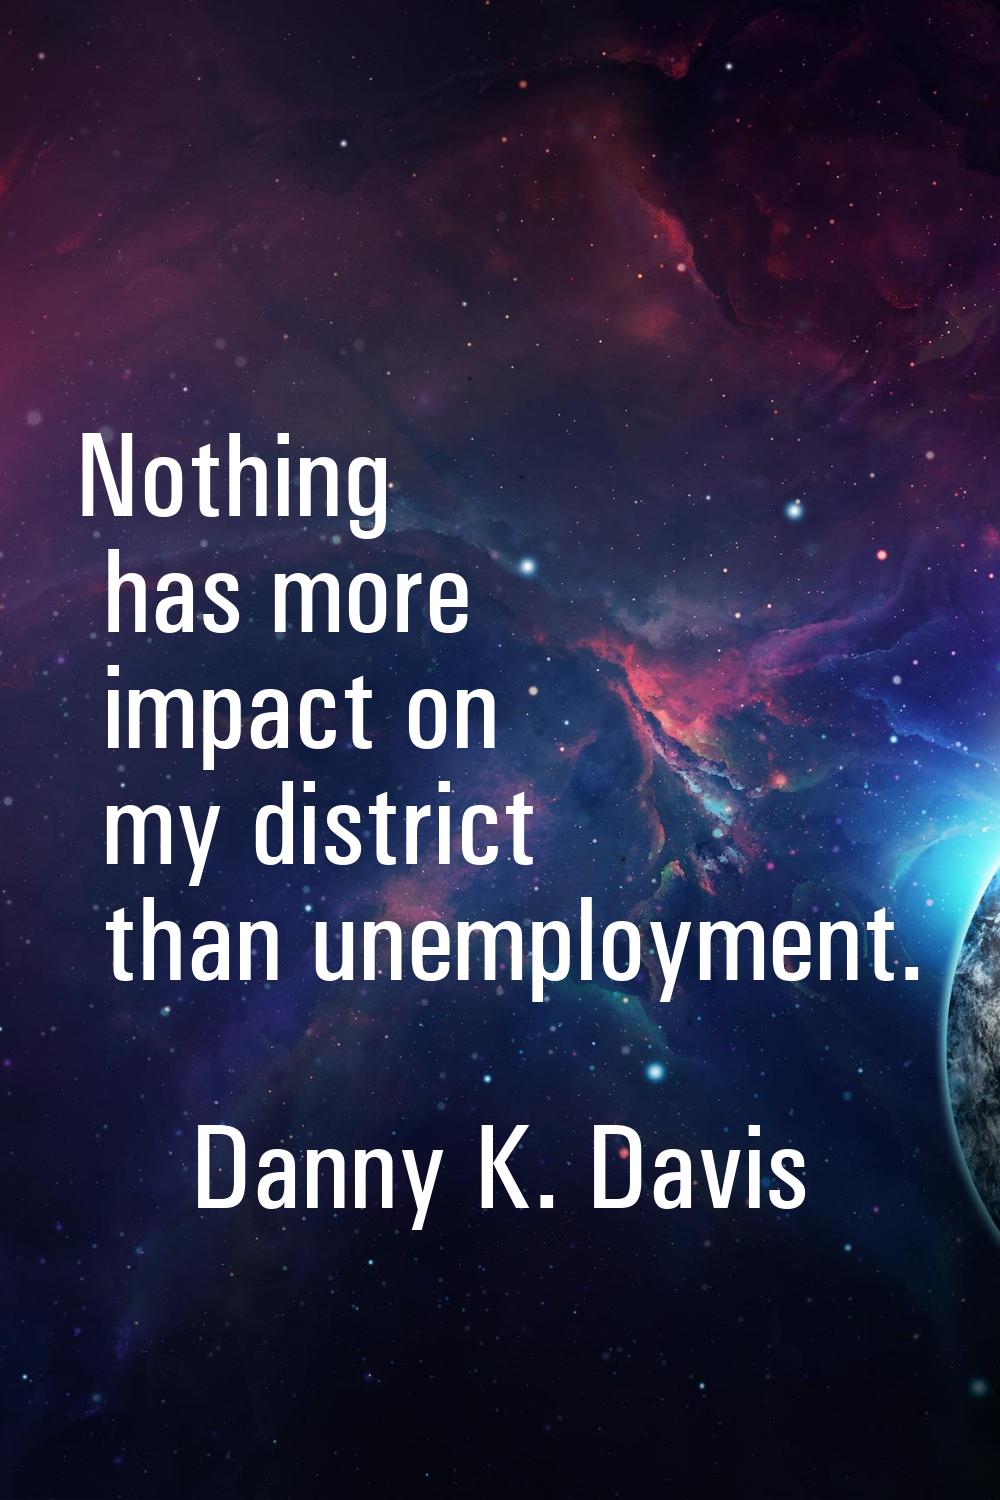 Nothing has more impact on my district than unemployment.